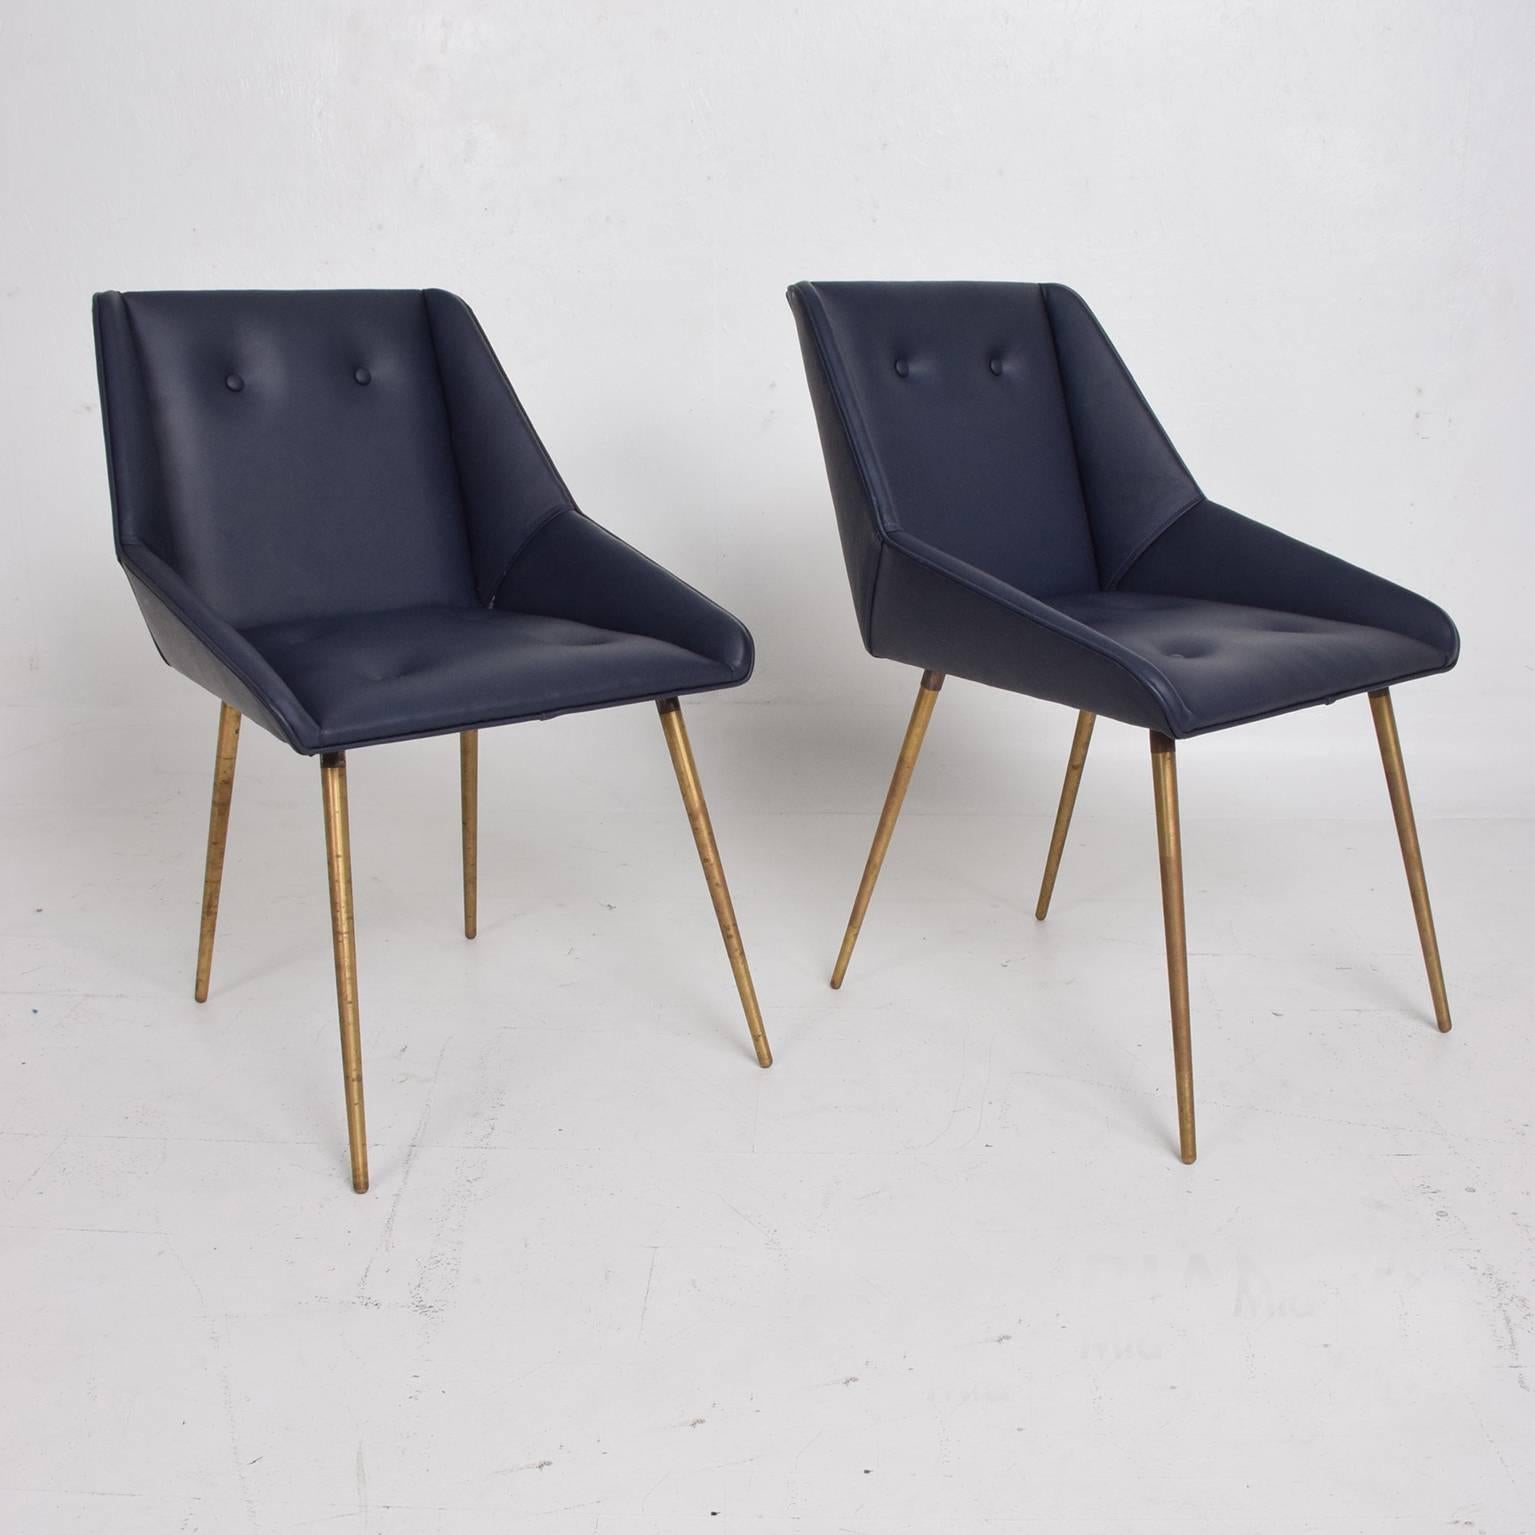 For your consideration a pair of stunning side chairs in leather with iron frames and brass legs.
In the style of Gio Ponti.
Unmarked no information on the maker.
 